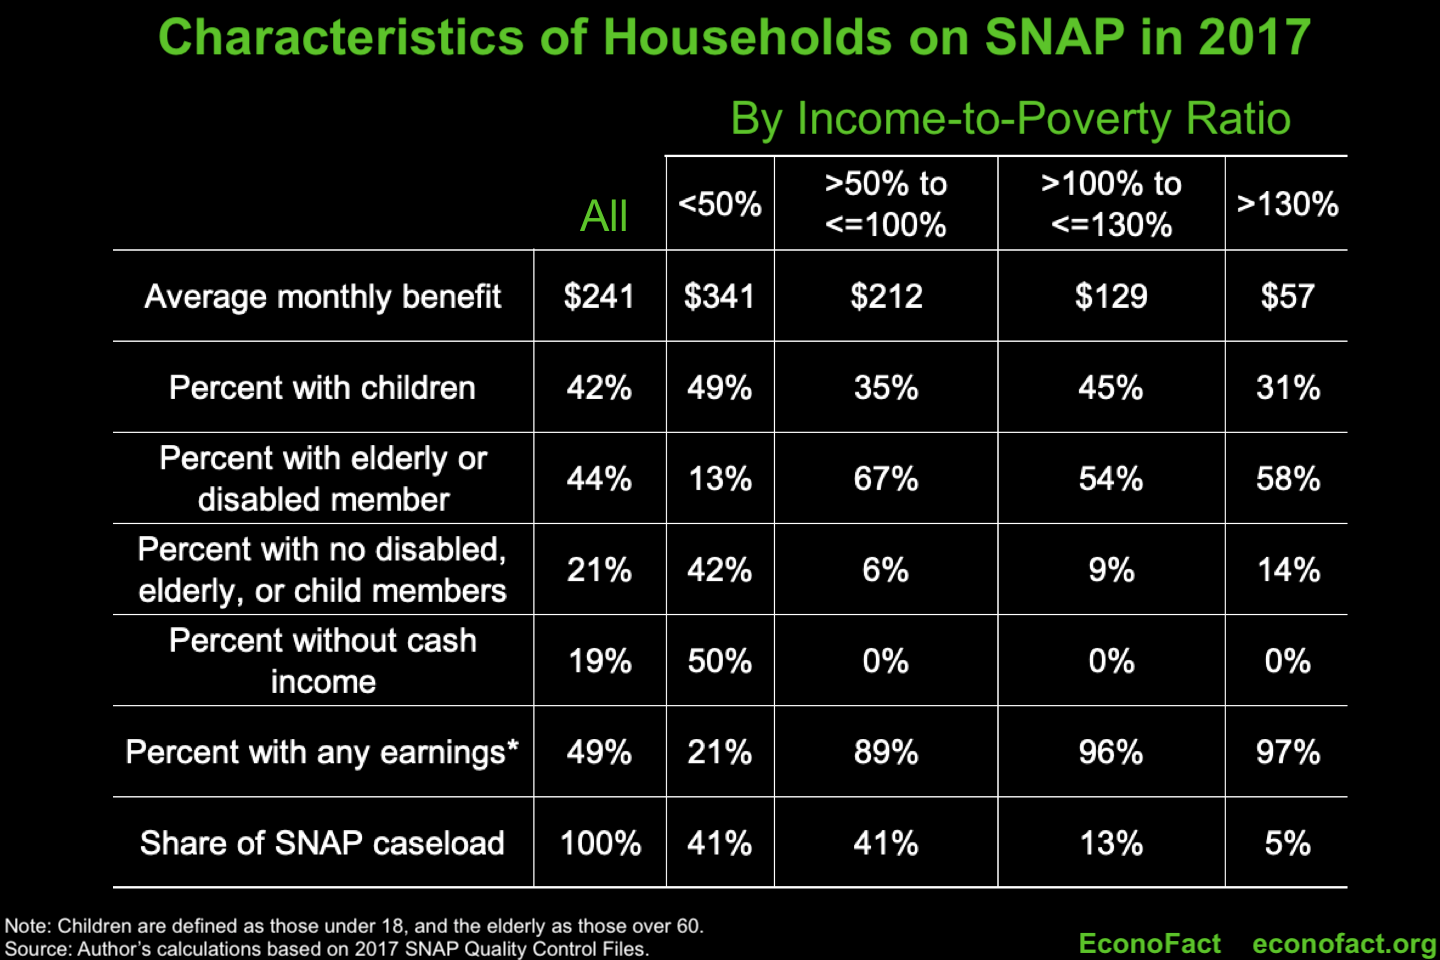 Who Would Be Affected by Proposed Changes to SNAP?